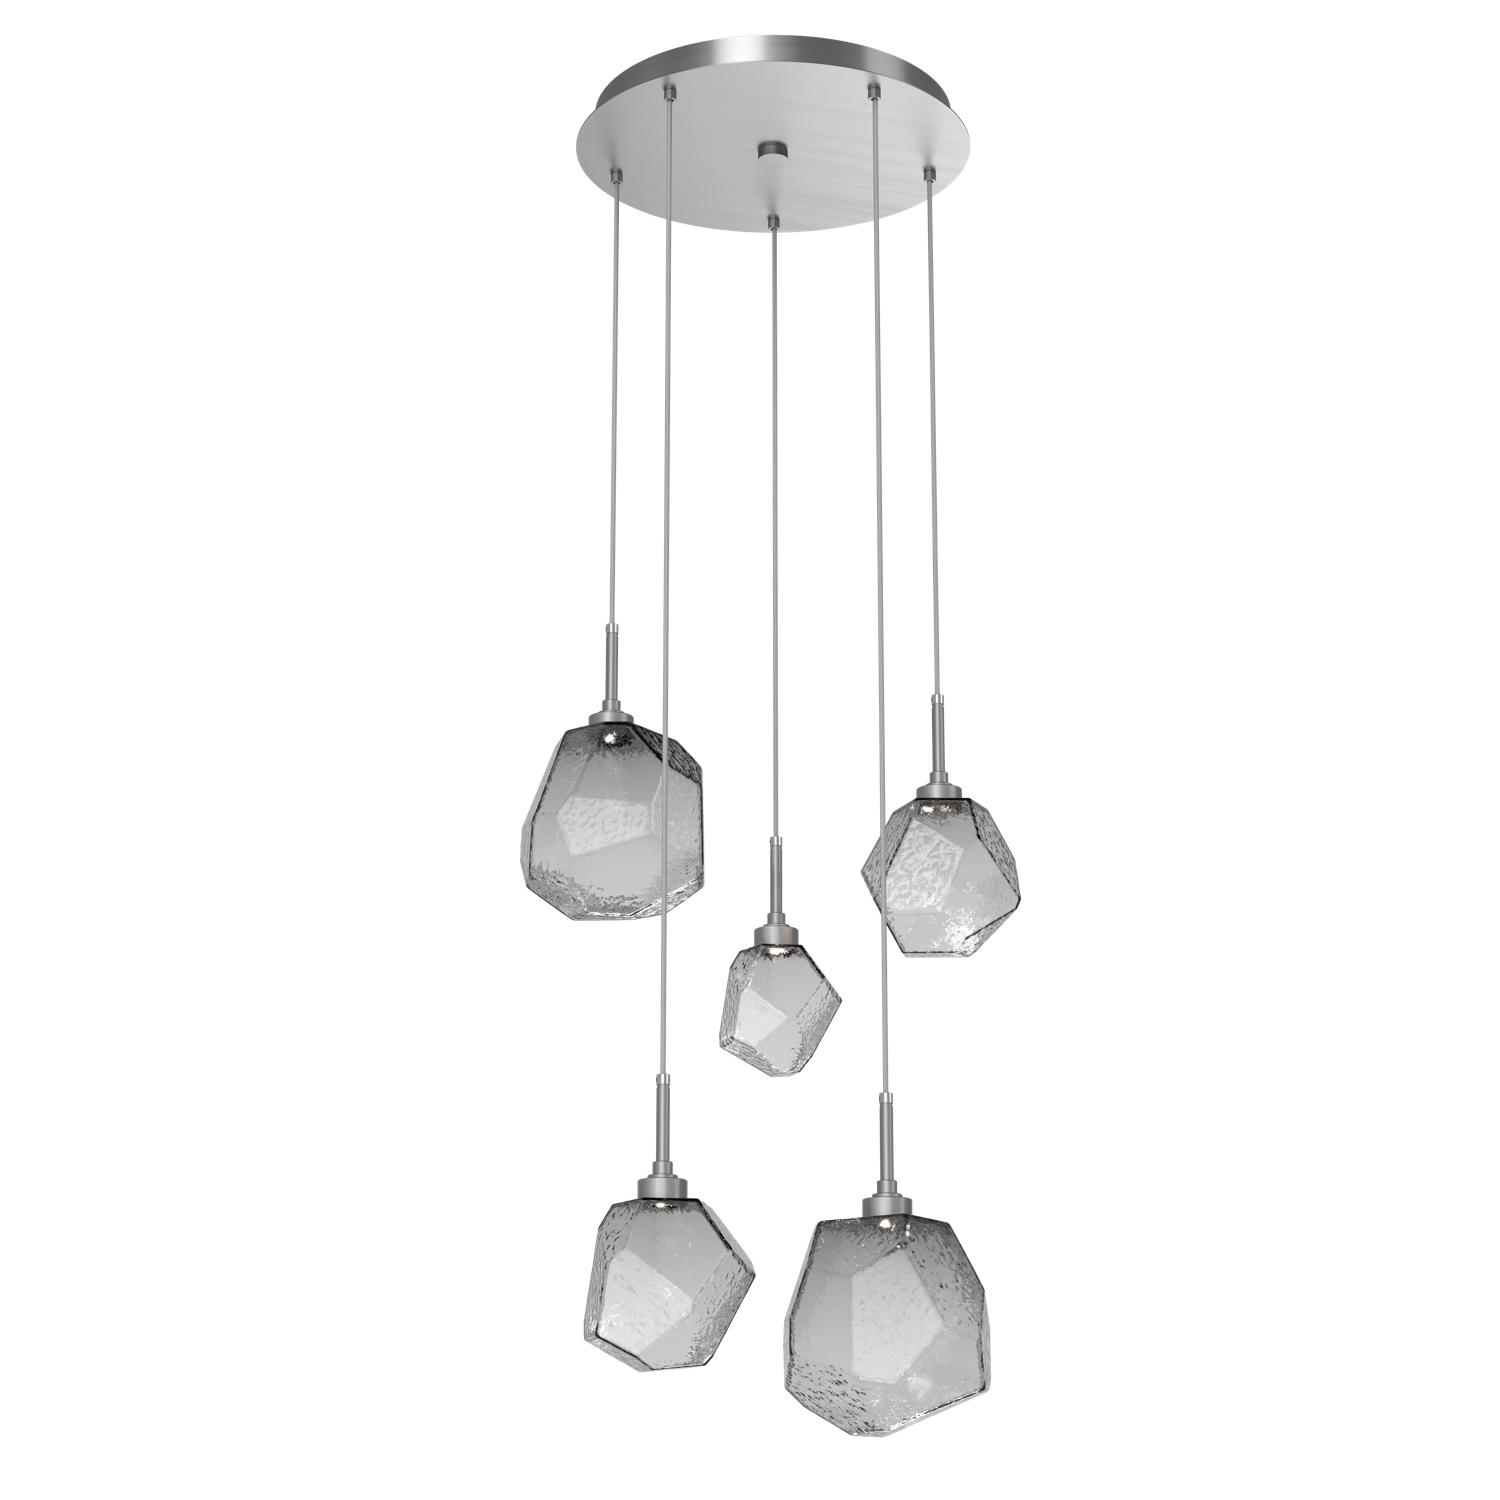 CHB0039-05-SN-S-Hammerton-Studio-Gem-5-light-round-pendant-chandelier-with-satin-nickel-finish-and-smoke-blown-glass-shades-and-LED-lamping